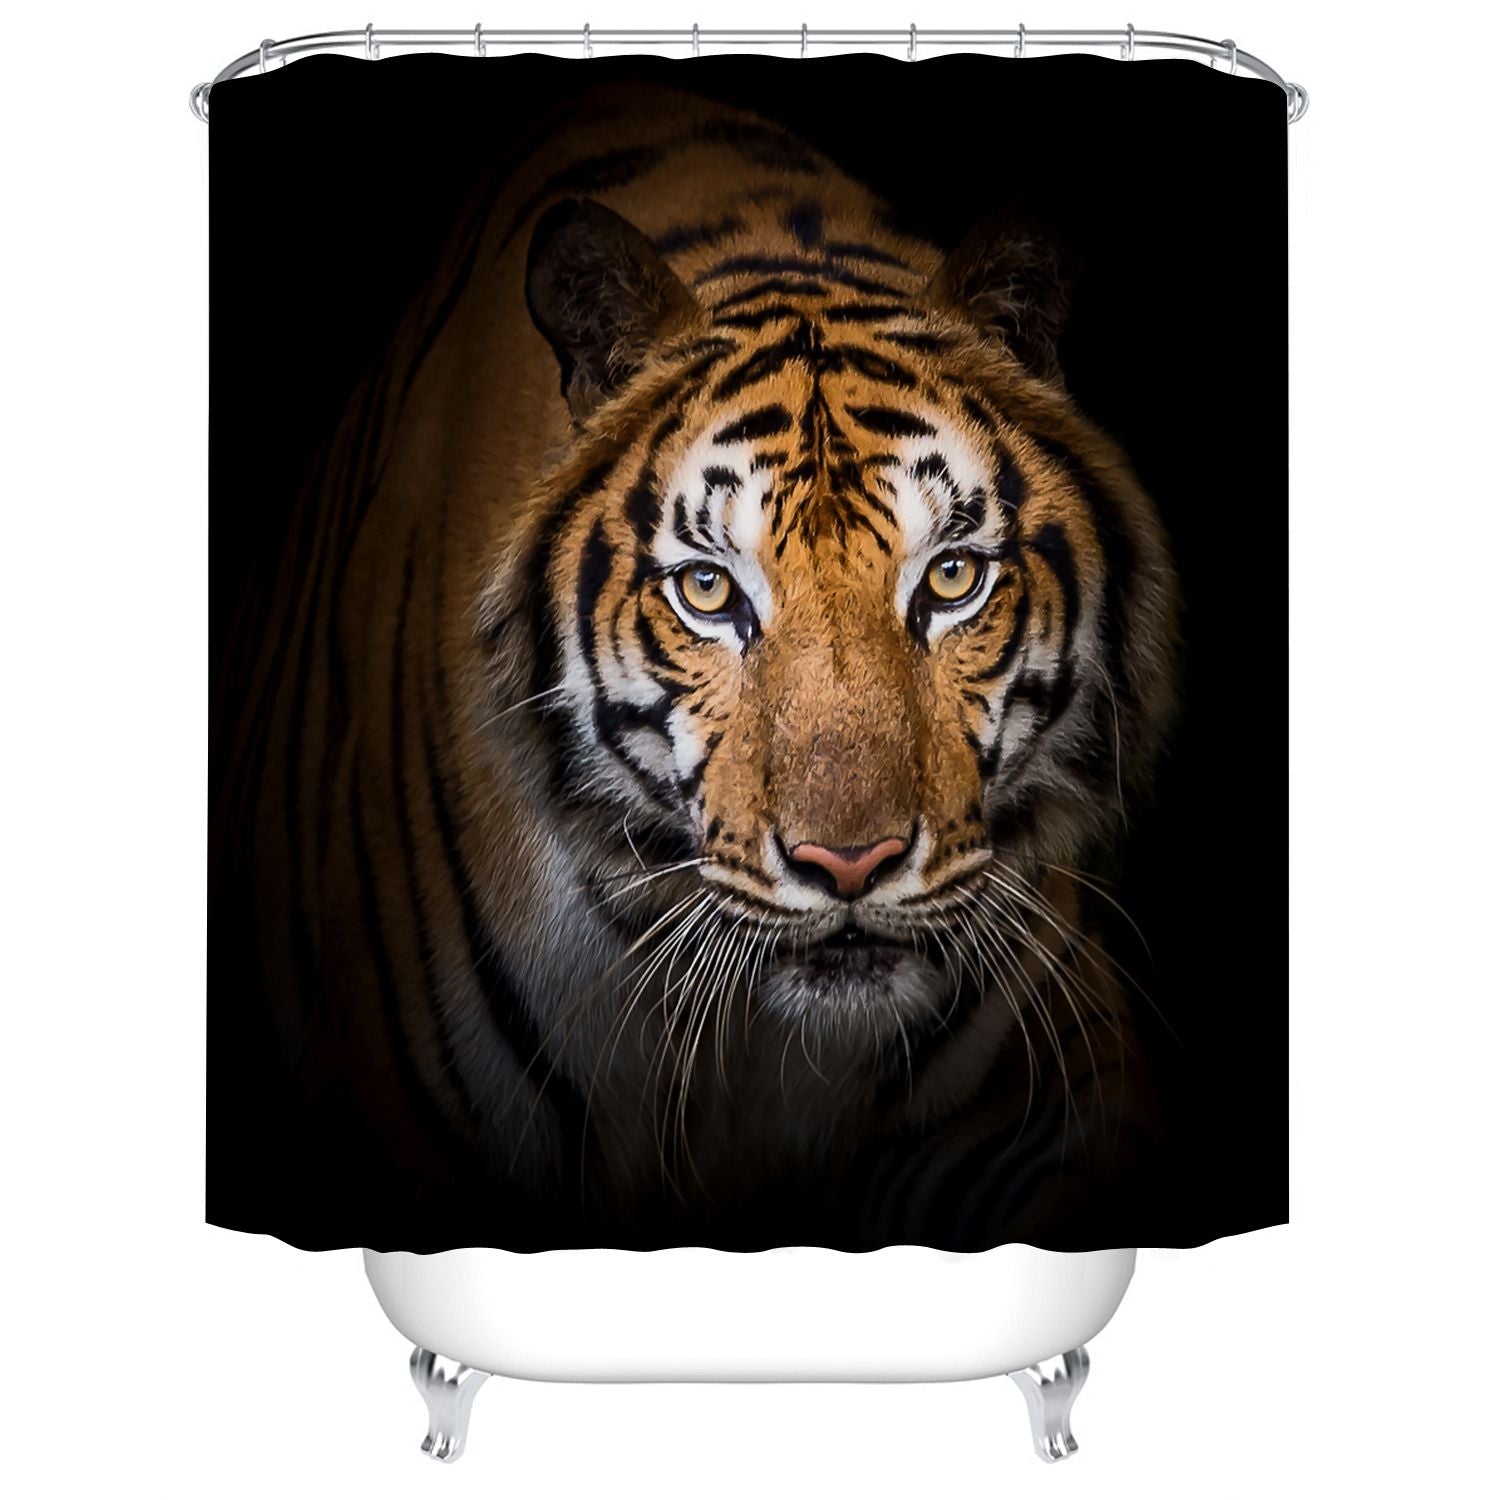 Staring at You Angry Tiger Shower Curtain